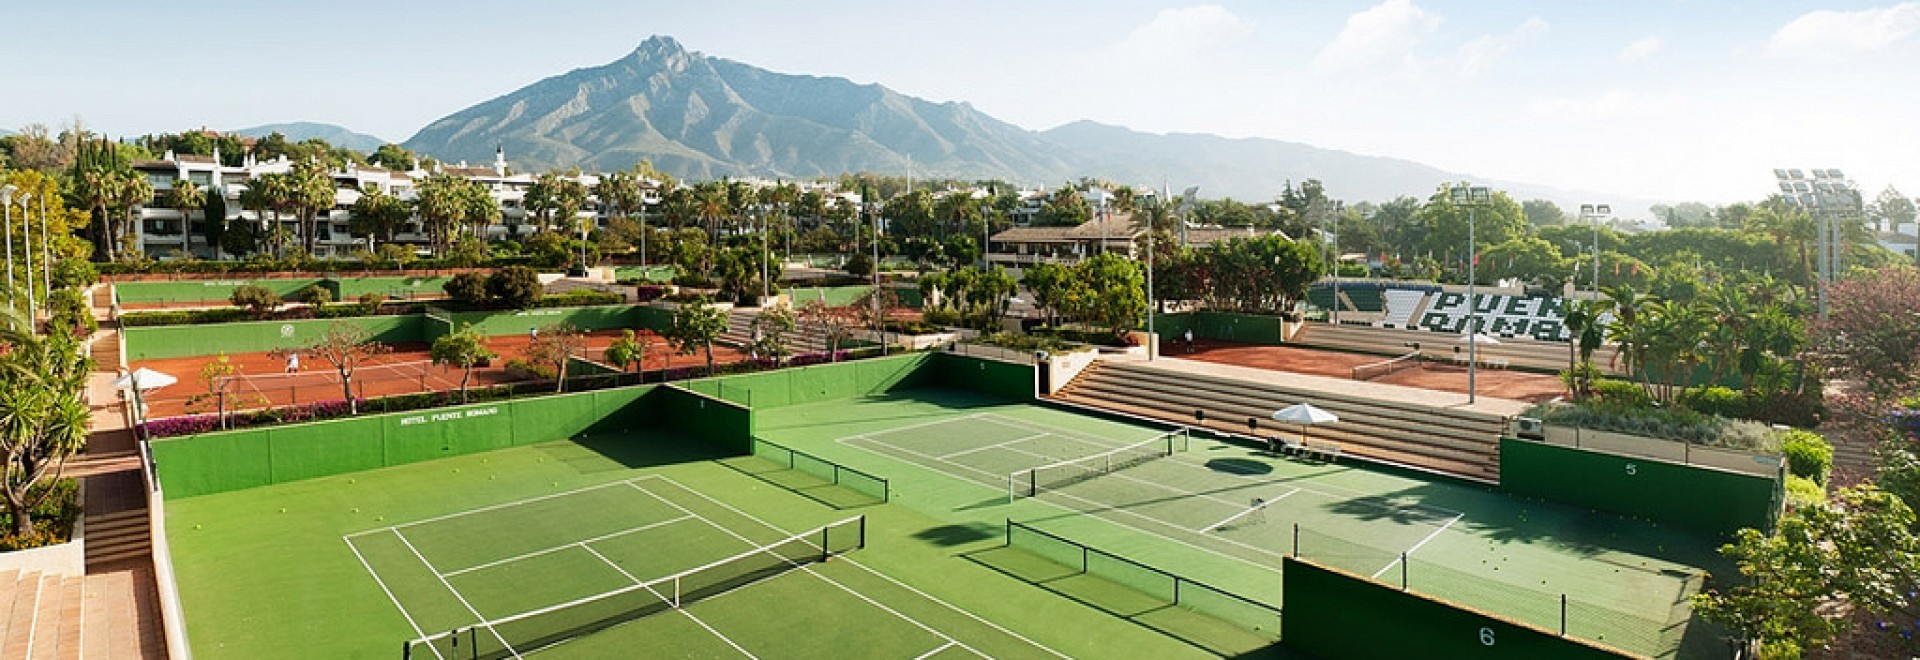 10 Ways Tennis Holidays Can Help You Live to 100 - Tennis Holidays that Enhance Your Health and Help You Live to 100